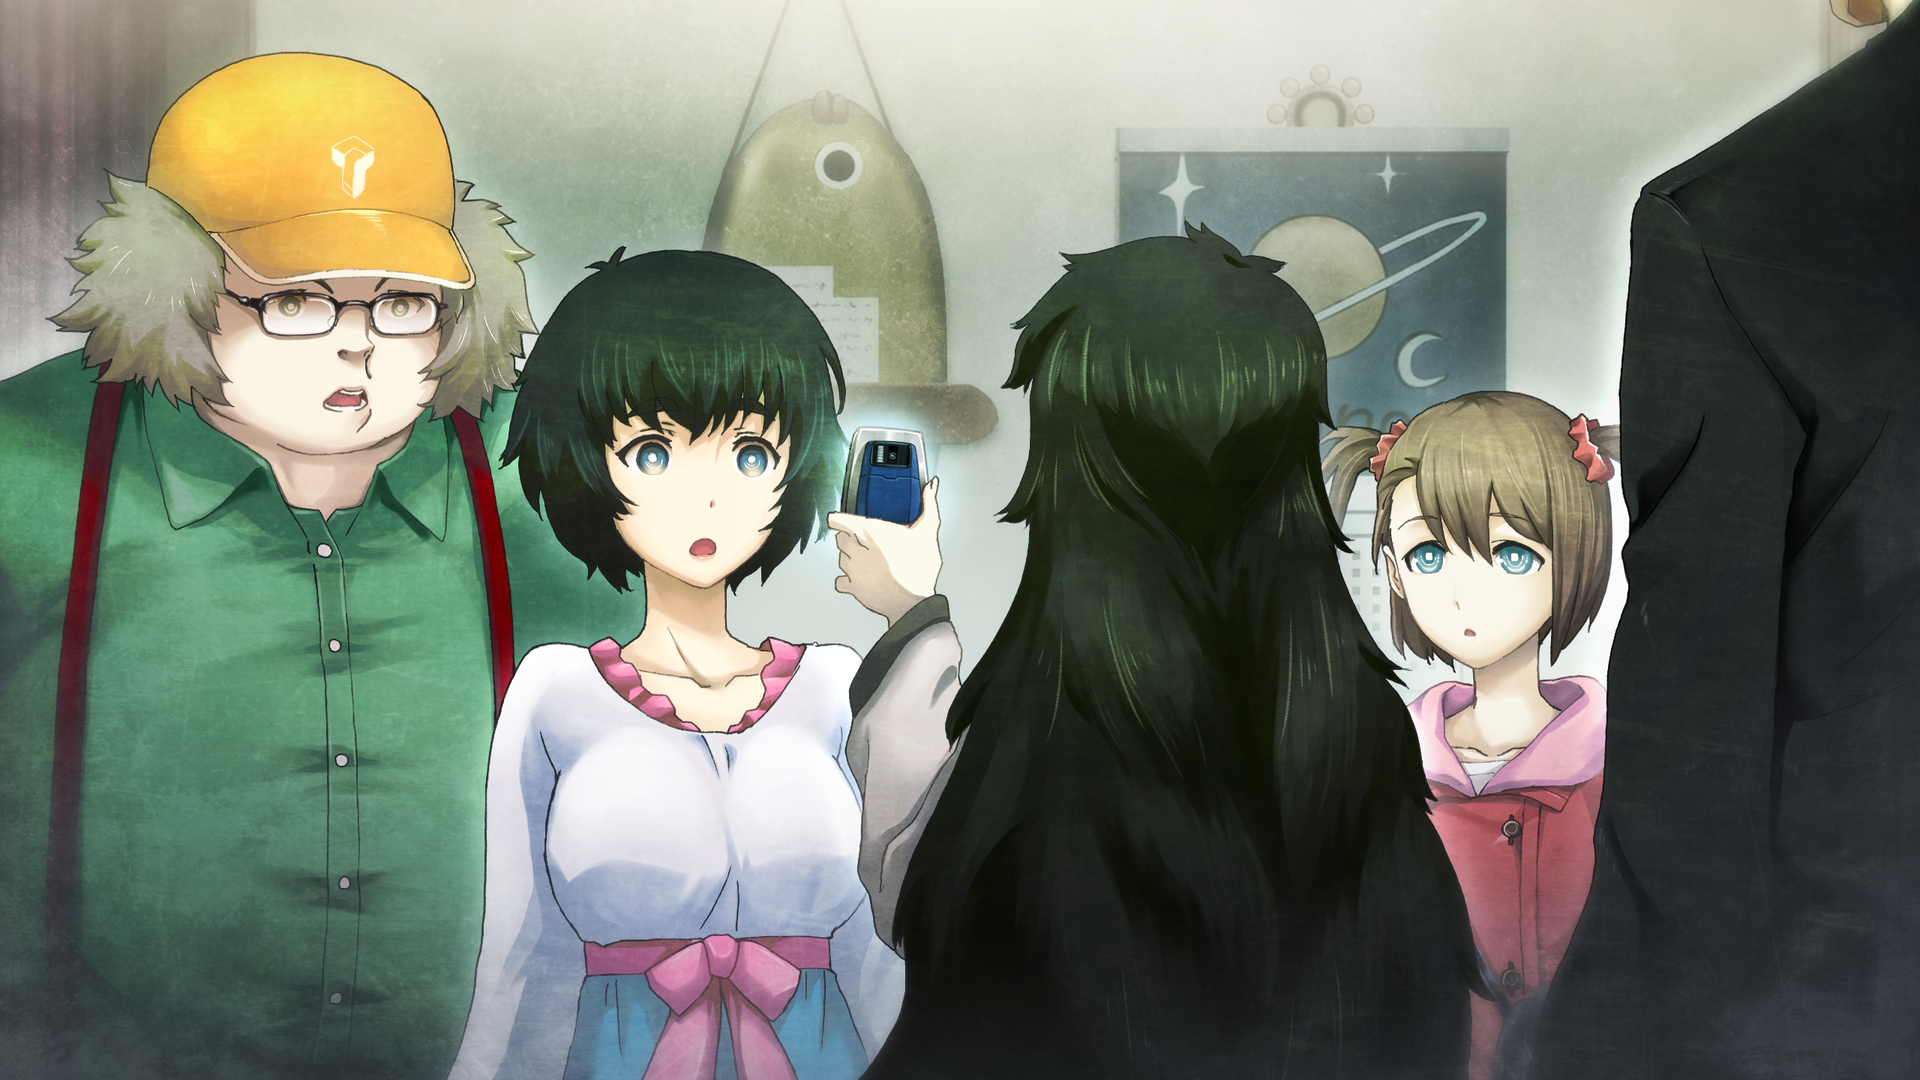 Anime Steins;Gate 0 HD Wallpaper | Background Image